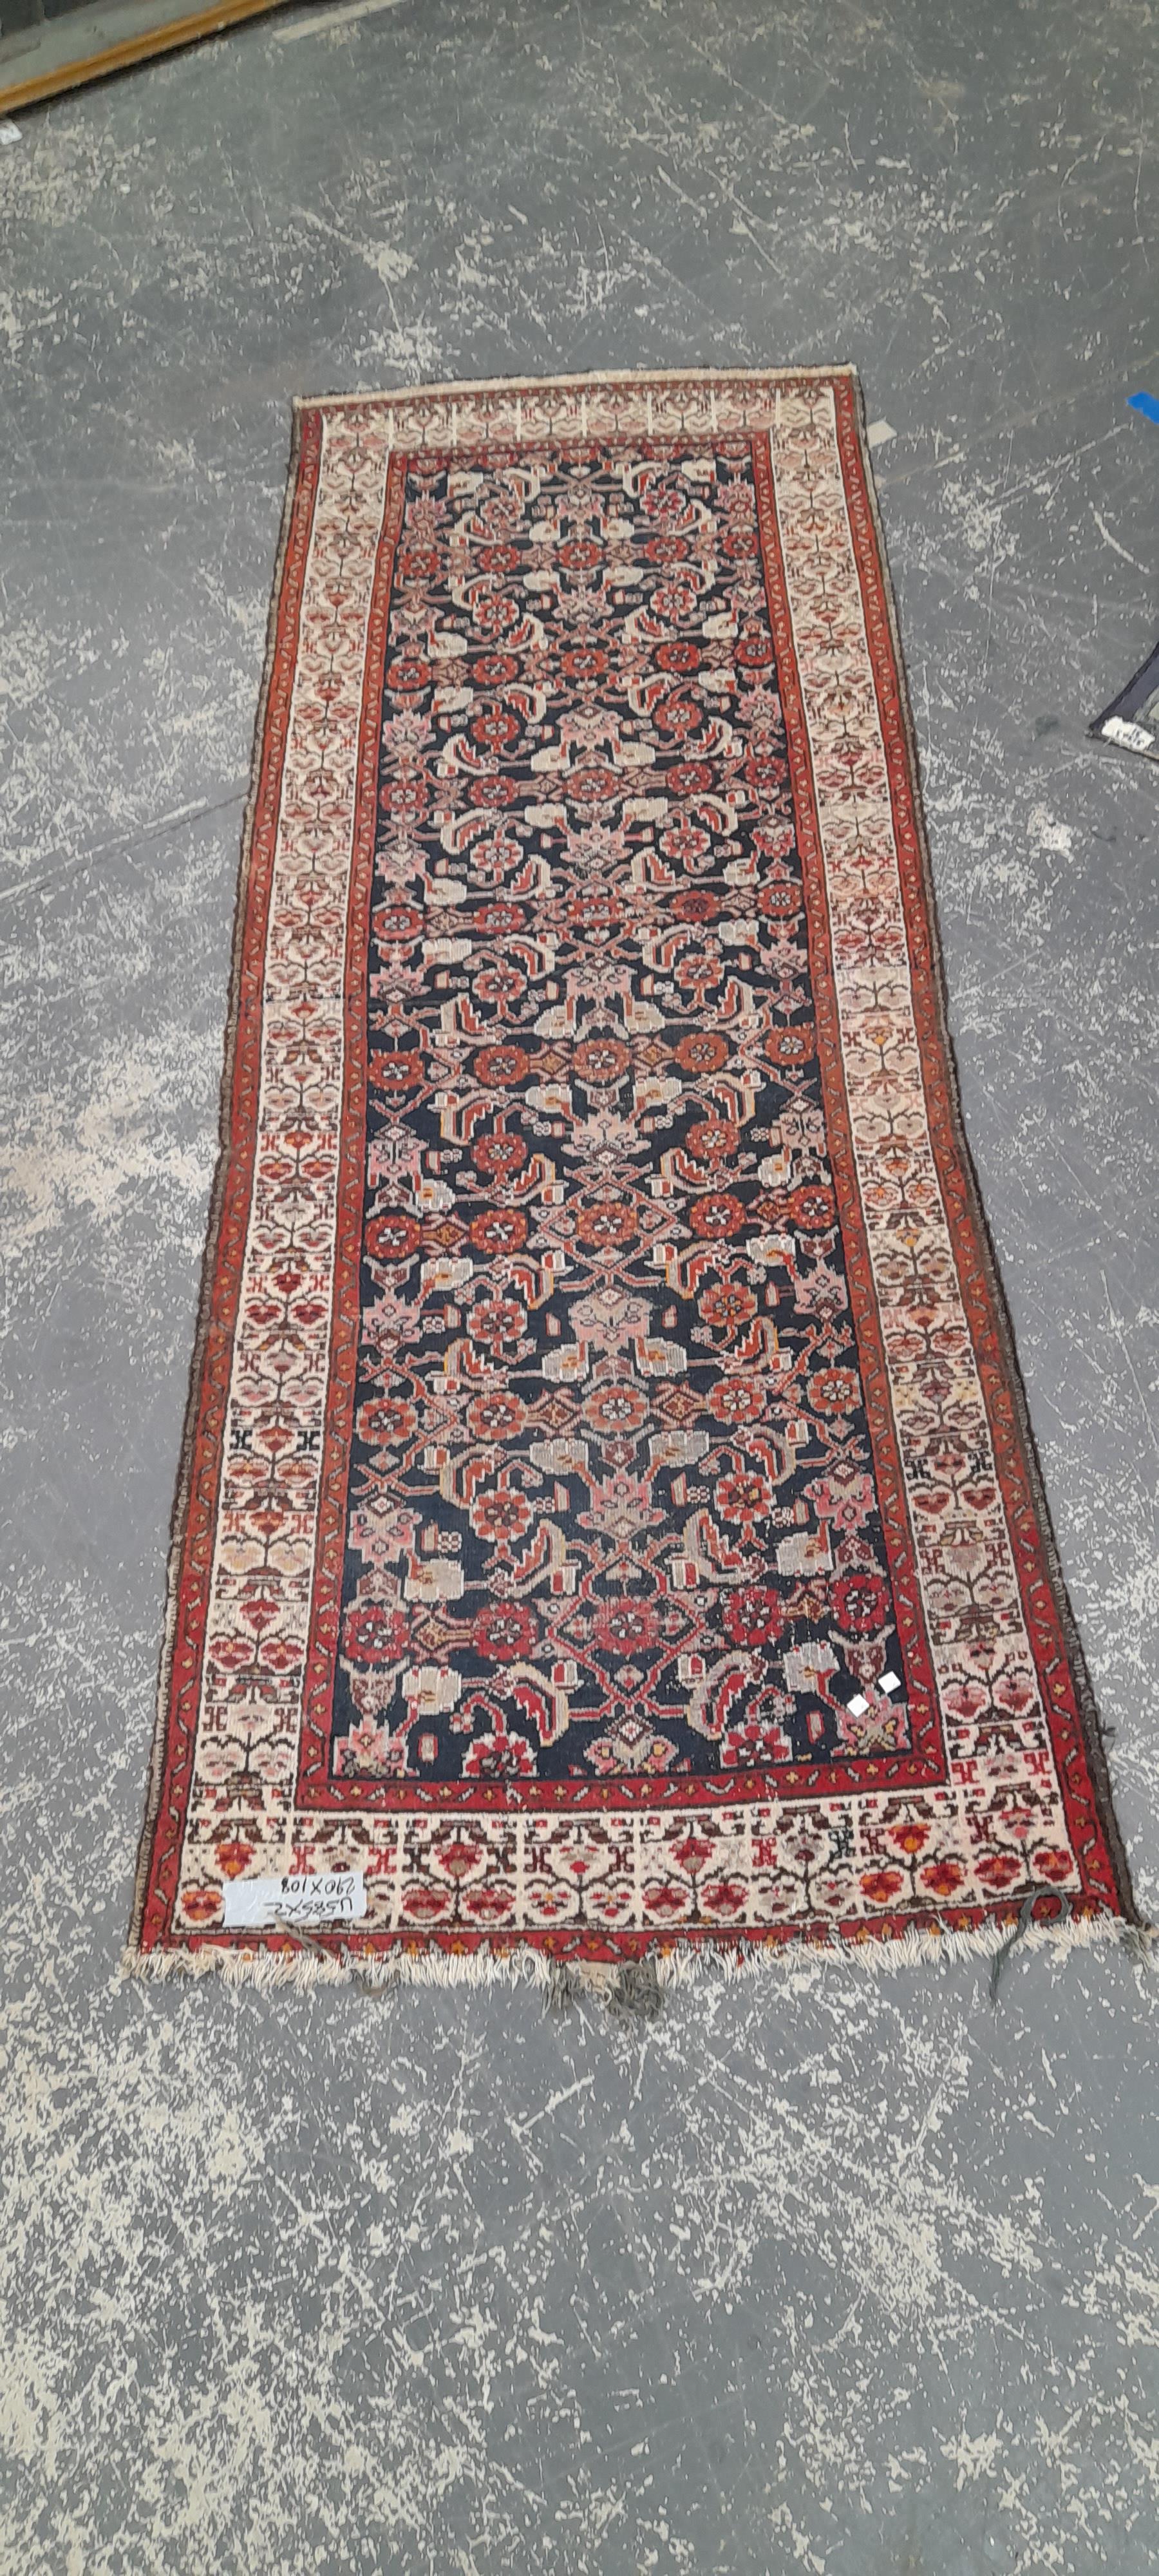 A PERSIAN HAMADAN RUNNER 290 x 108 cm, TOGETHER WITH A MACHINE MADE RUG 189 x 90 cm (2)